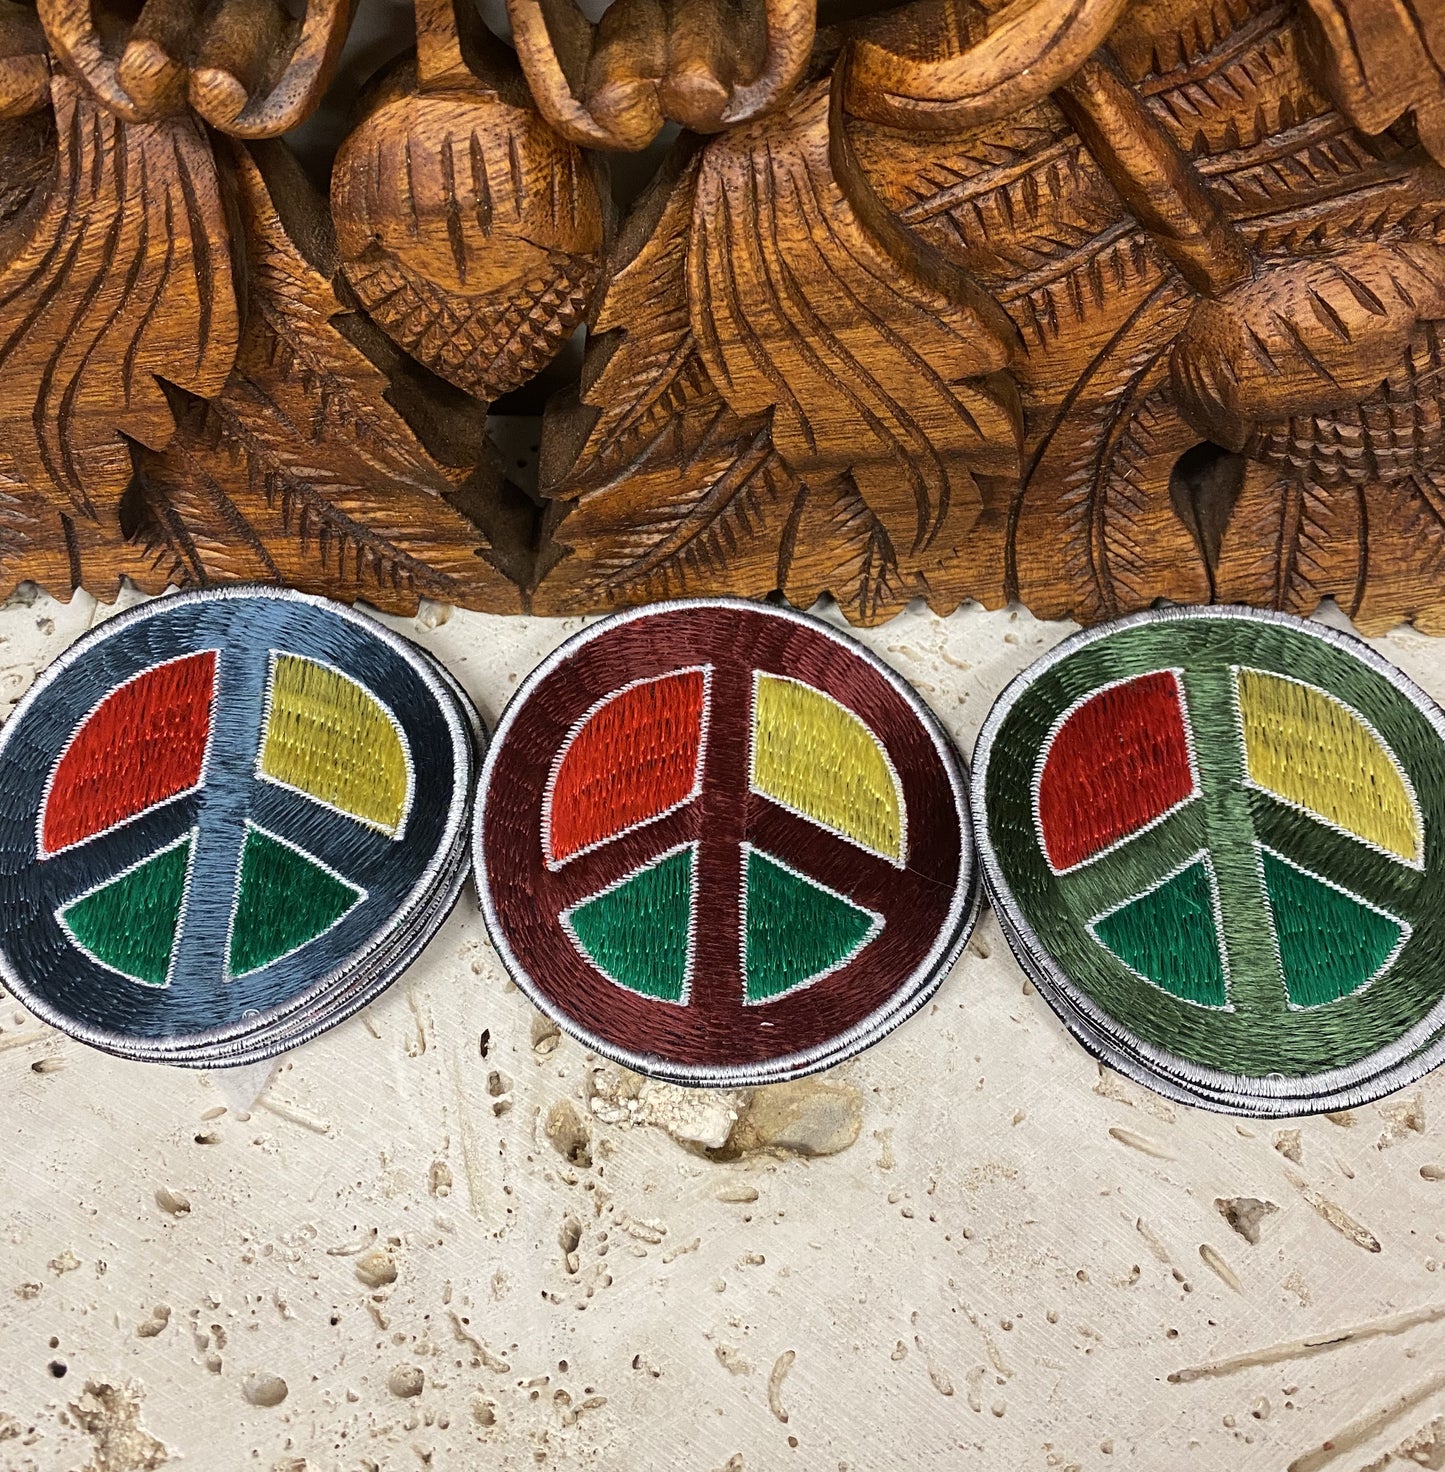 Handmade Embroidered Rasta Peace sign Patches